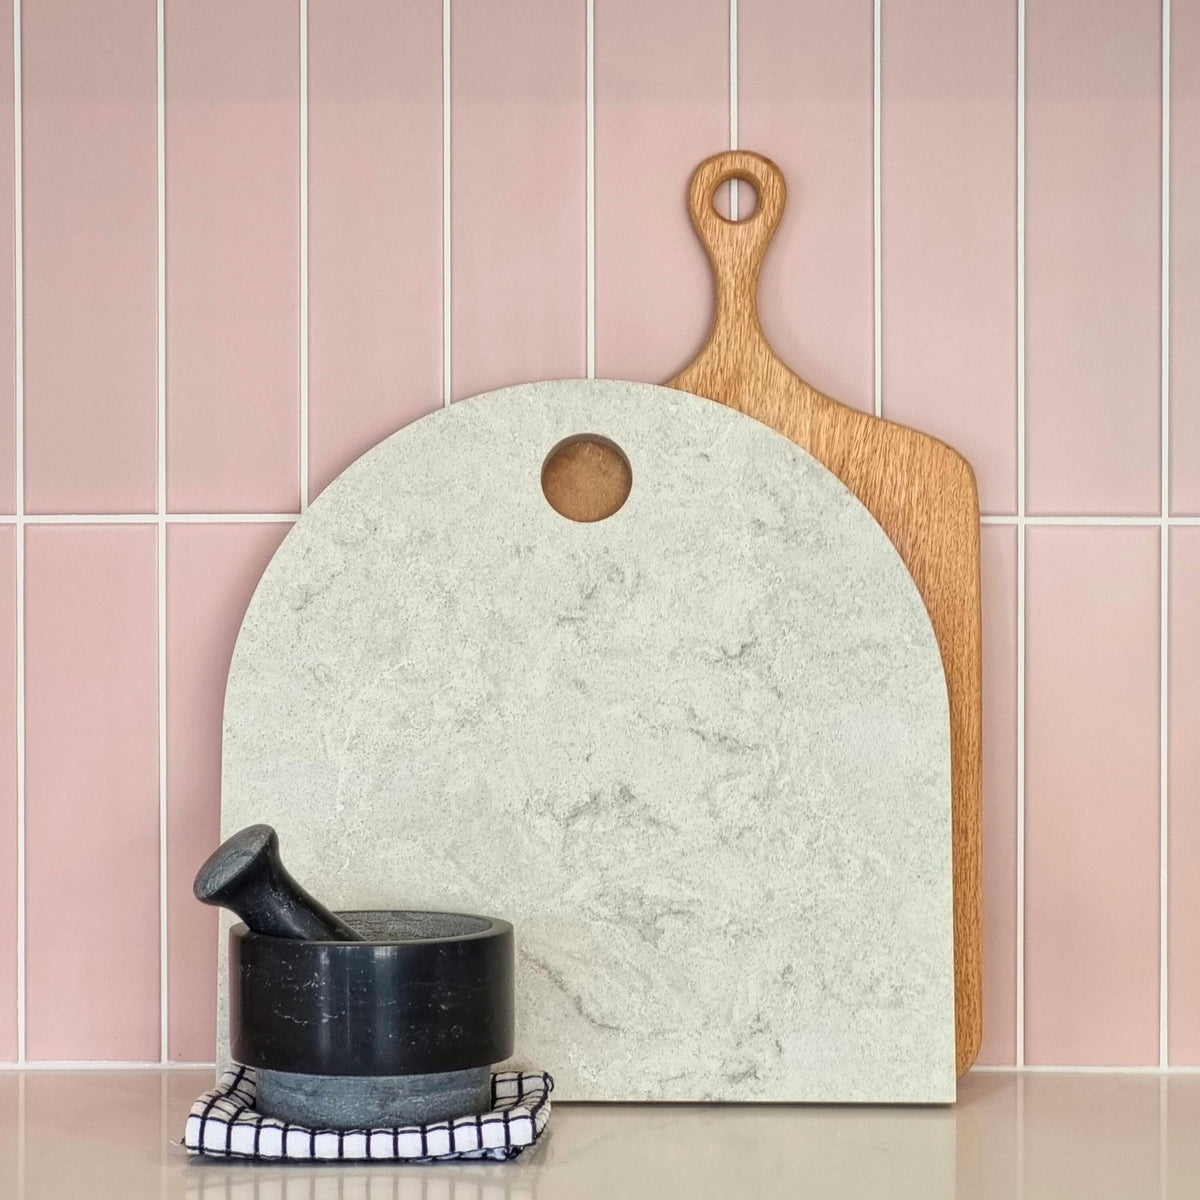 Large arch cheese platter with timber paddle board and black pestle and mortar. Pastel pink tiled splashback. Caesarstone Bianco Drift.